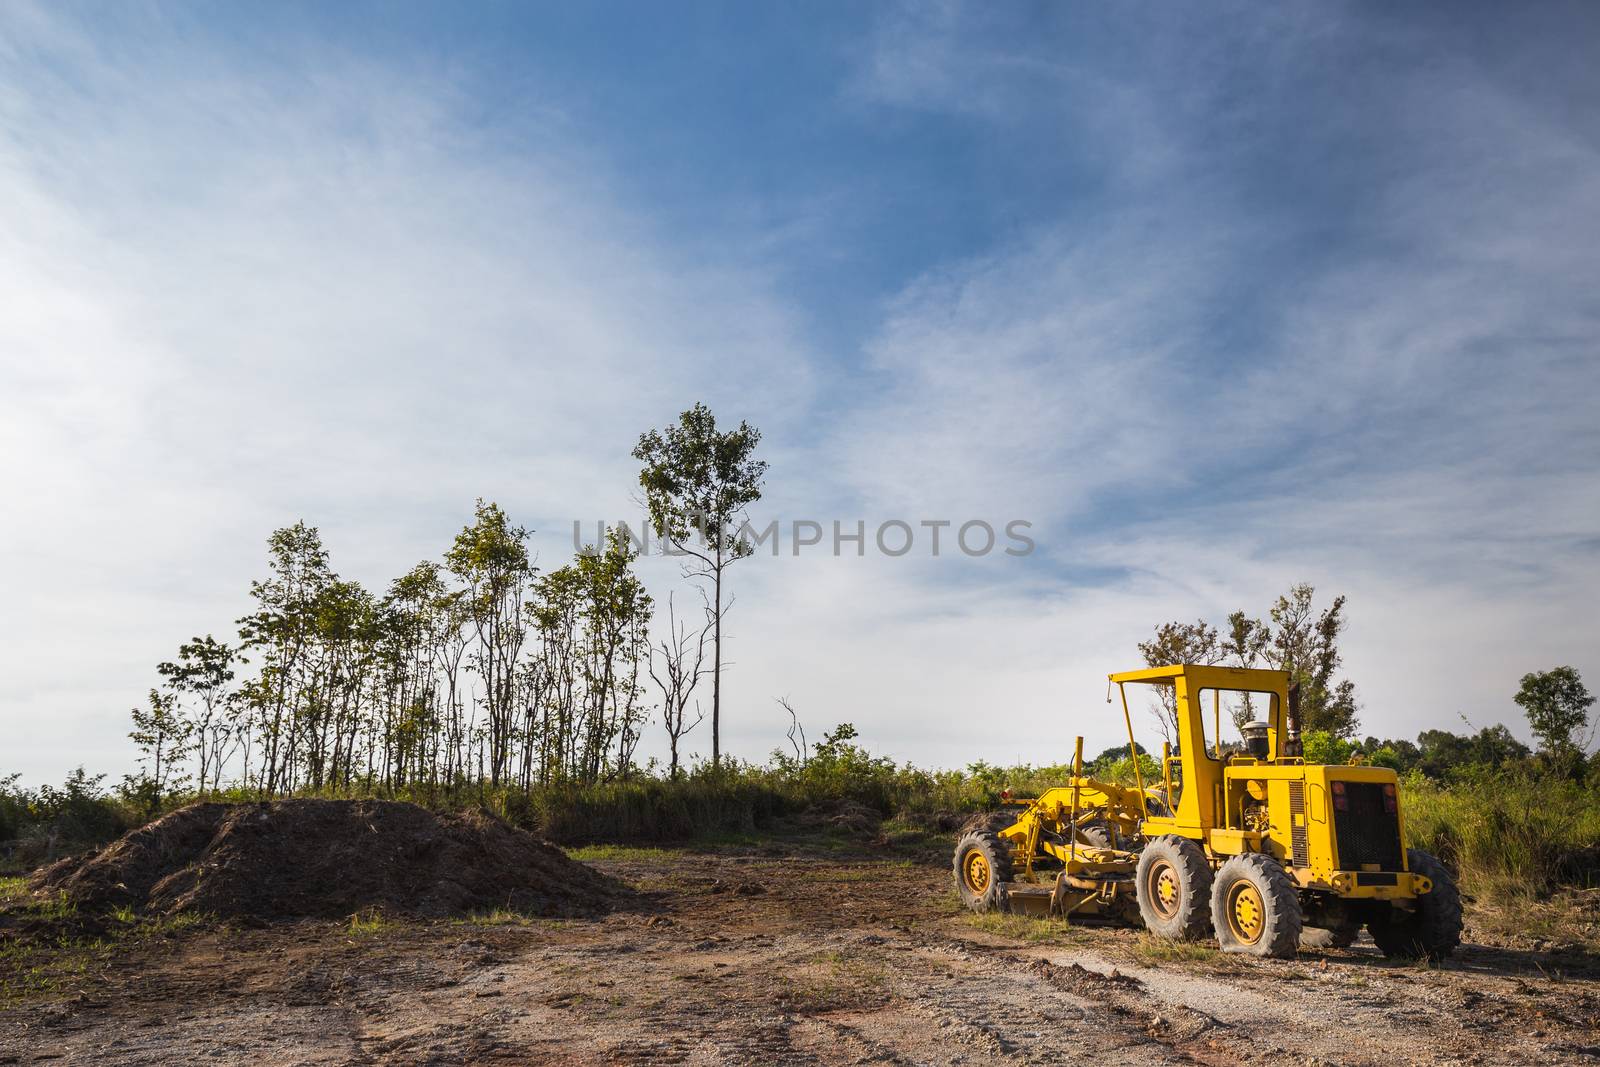 Wheel loader Excavator in the field with clear bule sky and tree in the background